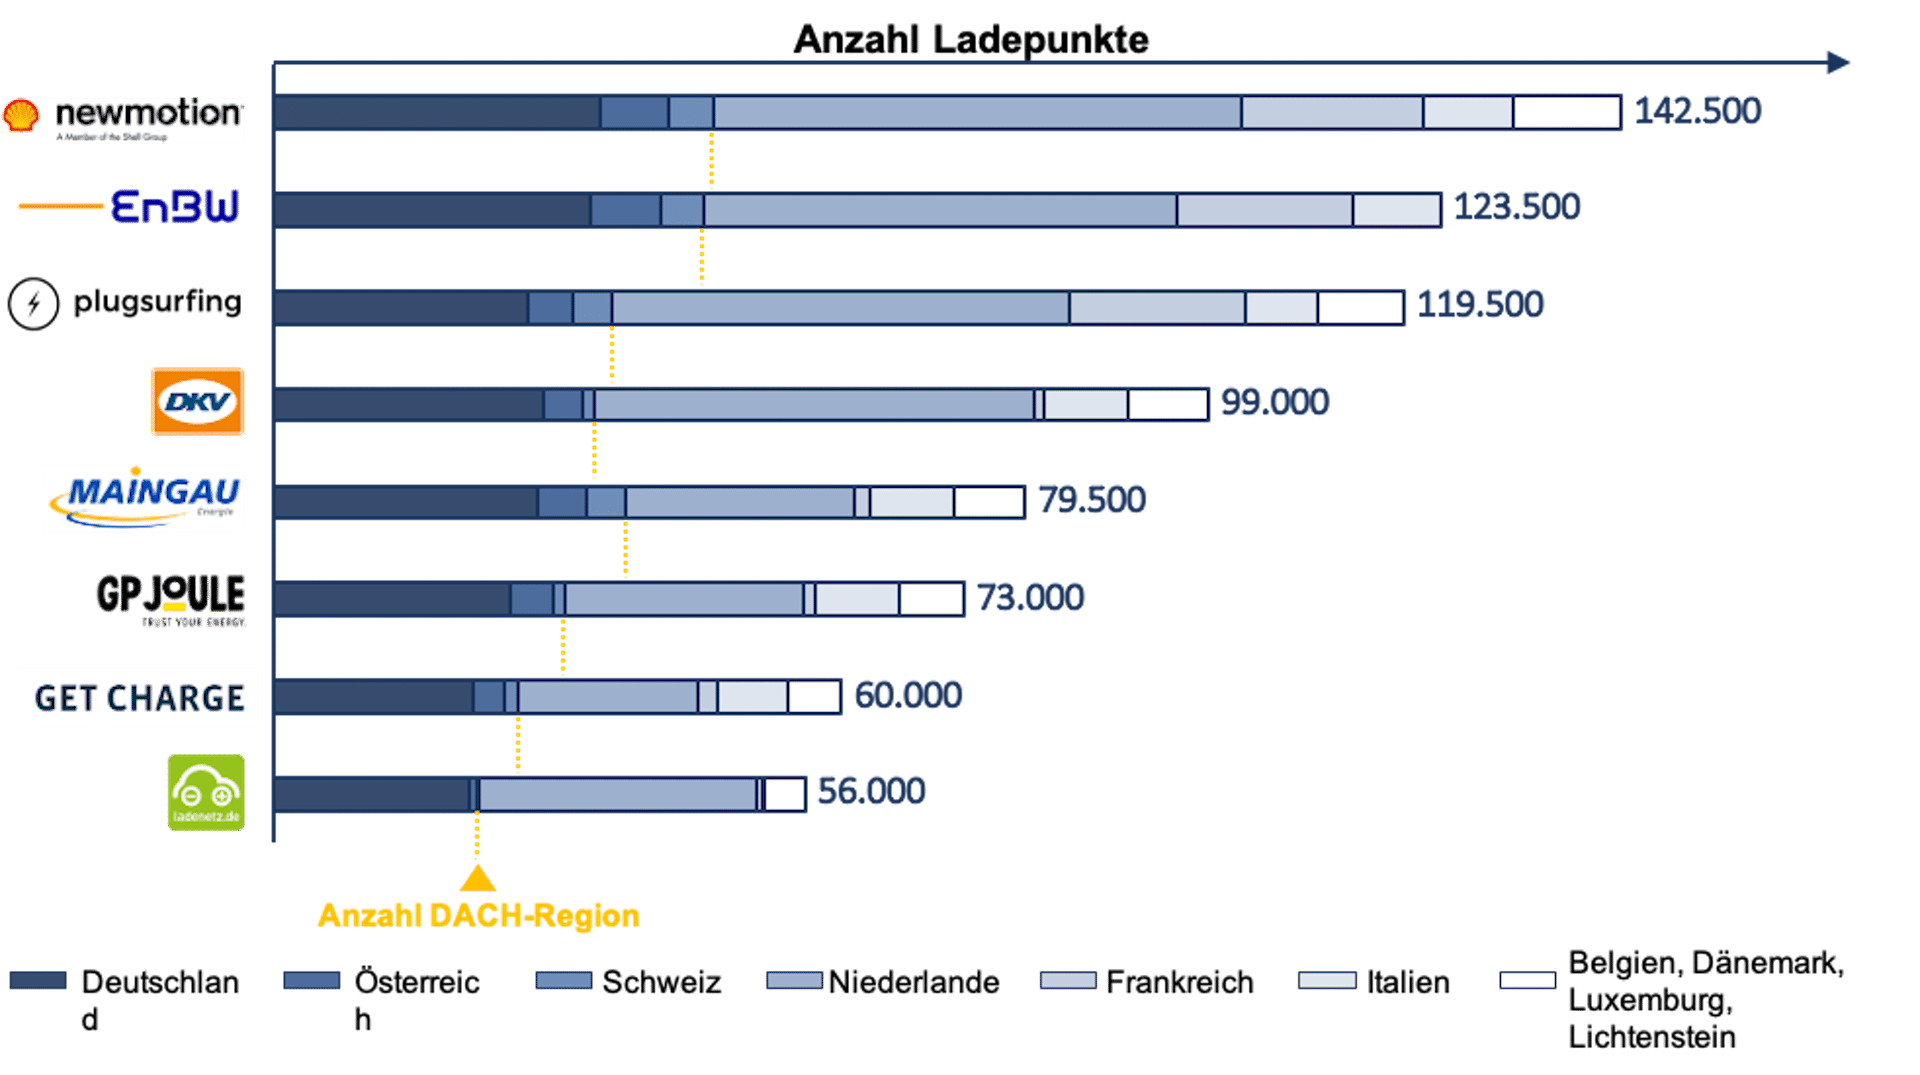 P3-E-Mobility-Excellence-Anzahl-Ladepunkte_